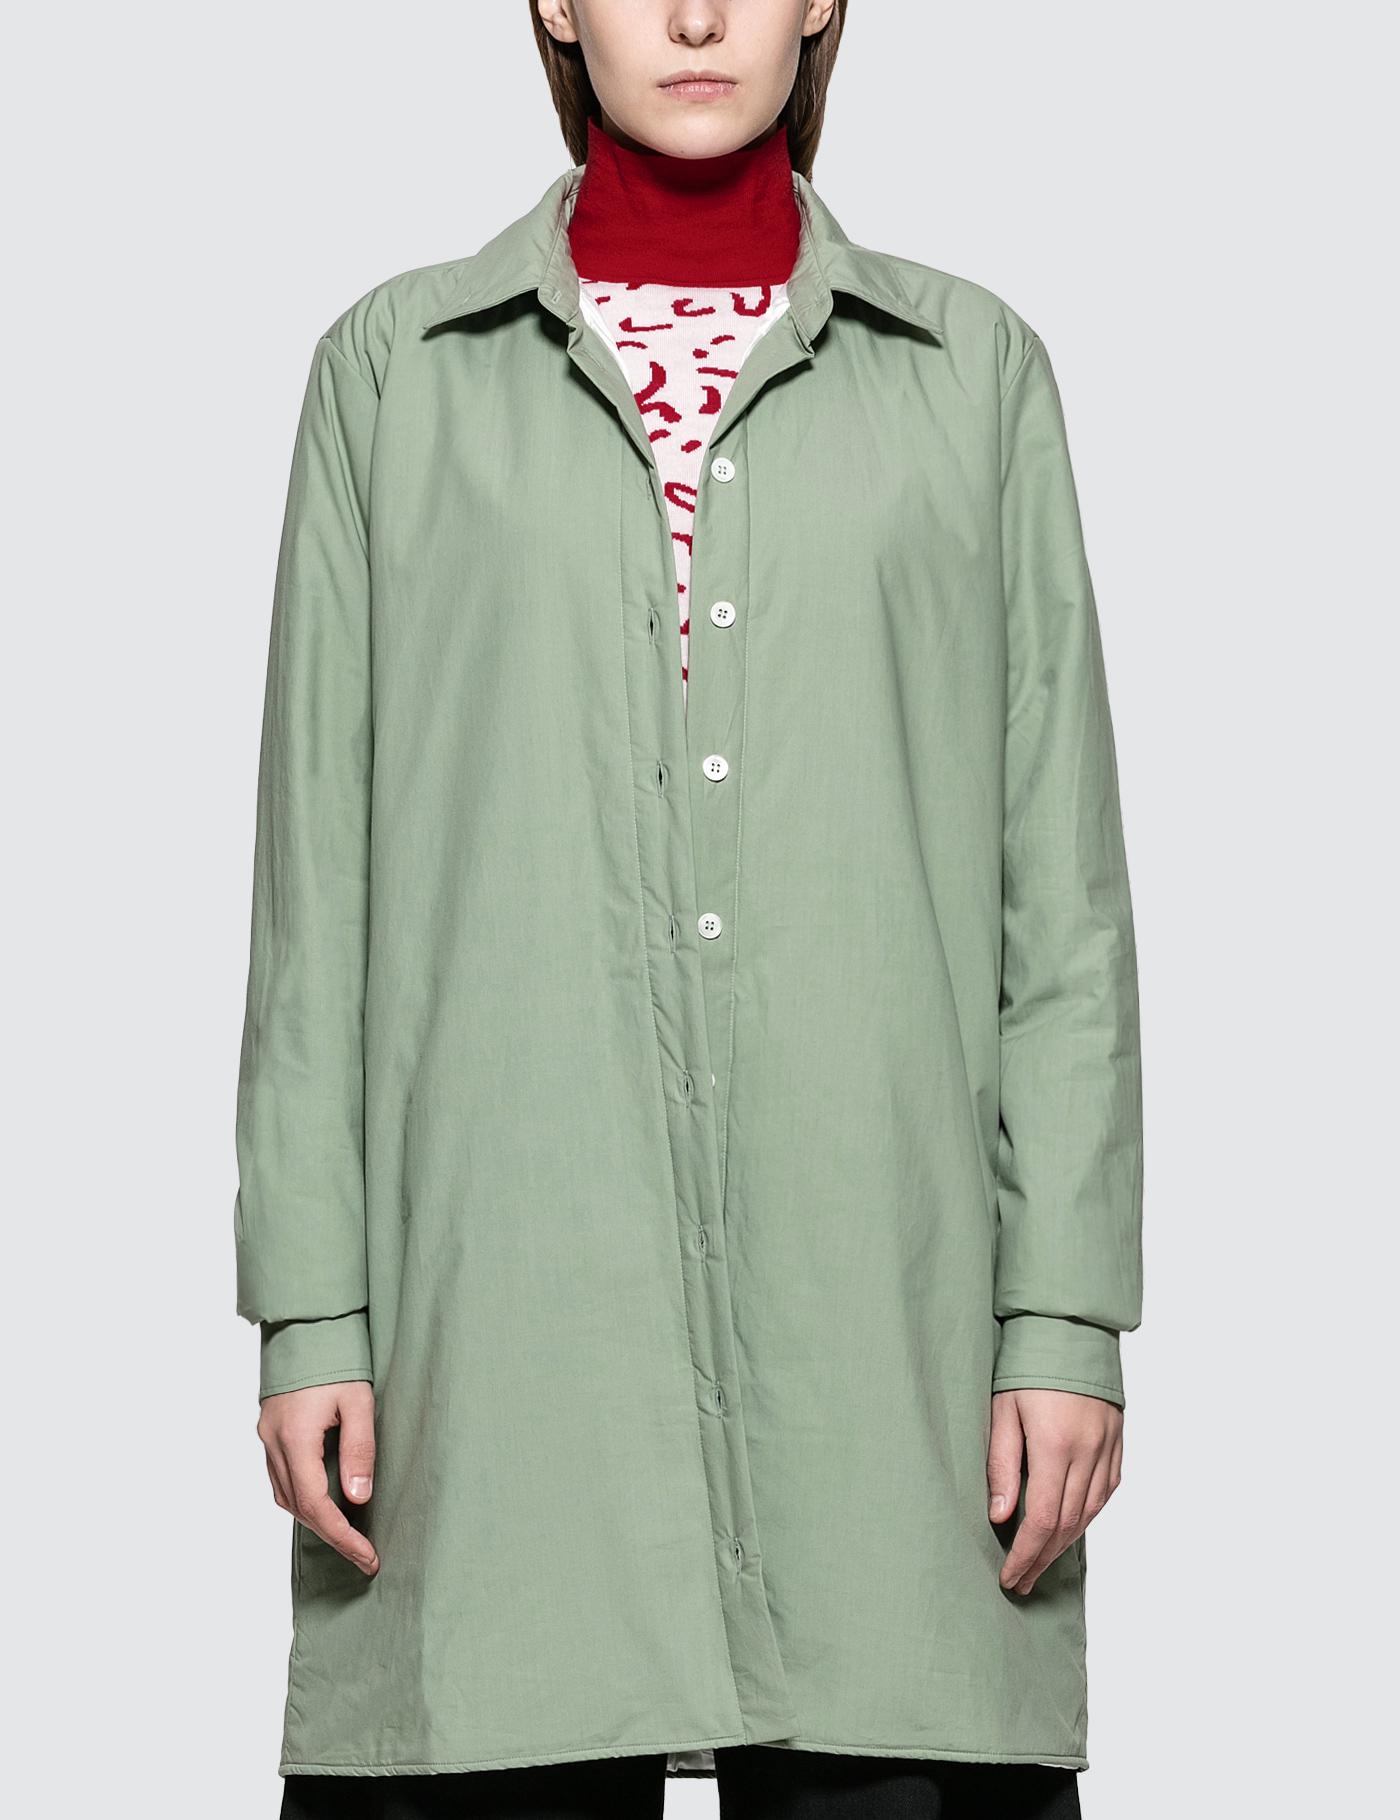 Lightly Padded Oversized Shirt With Slits by AALTO